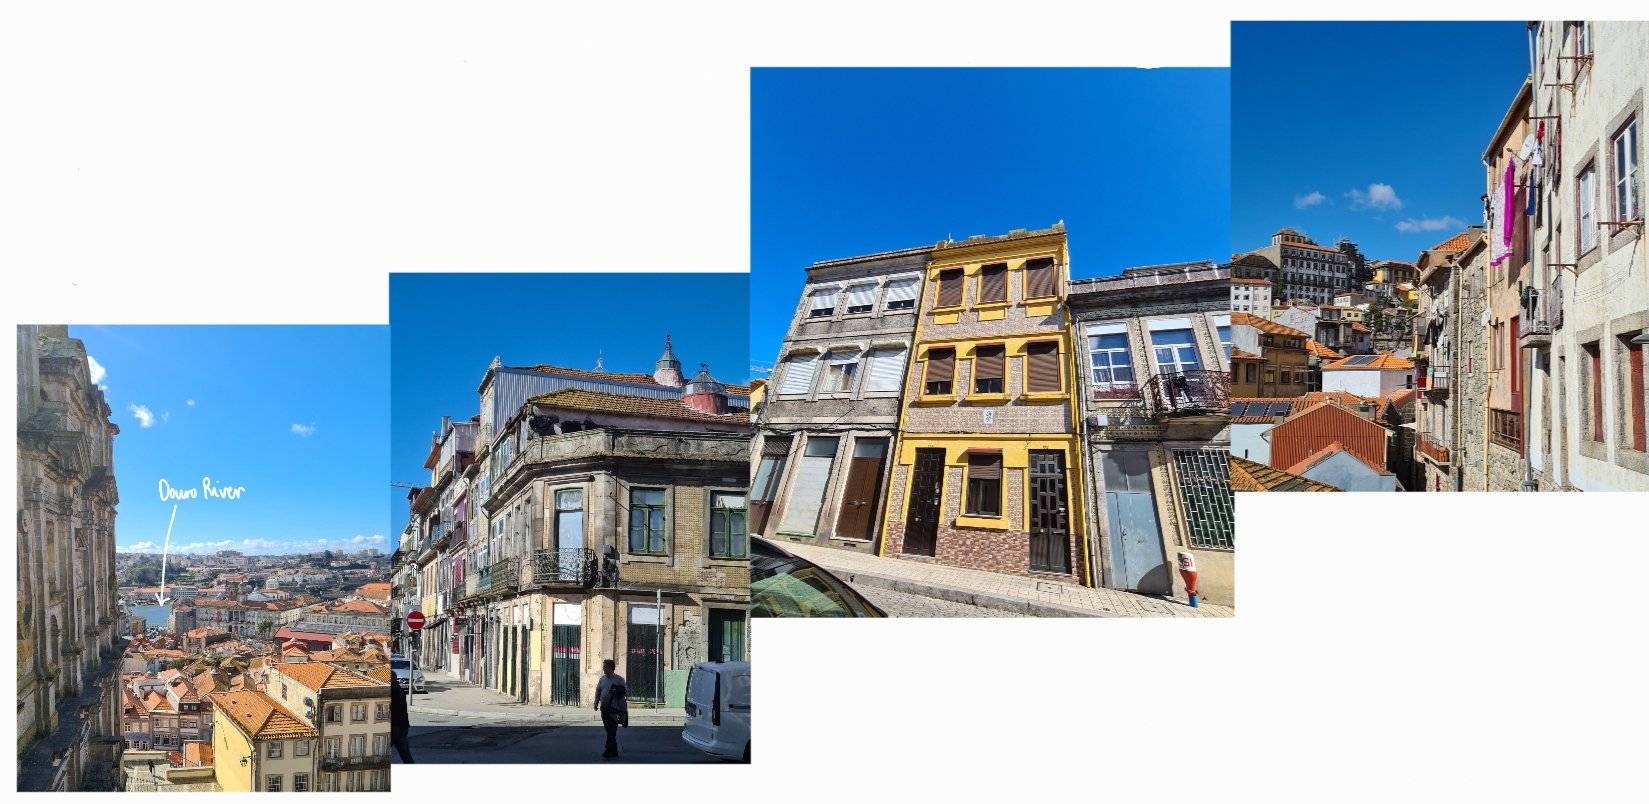 composite of old streets and buildings in sunny city, one with text reading 'River Douro' and arrow pointing to river running through city